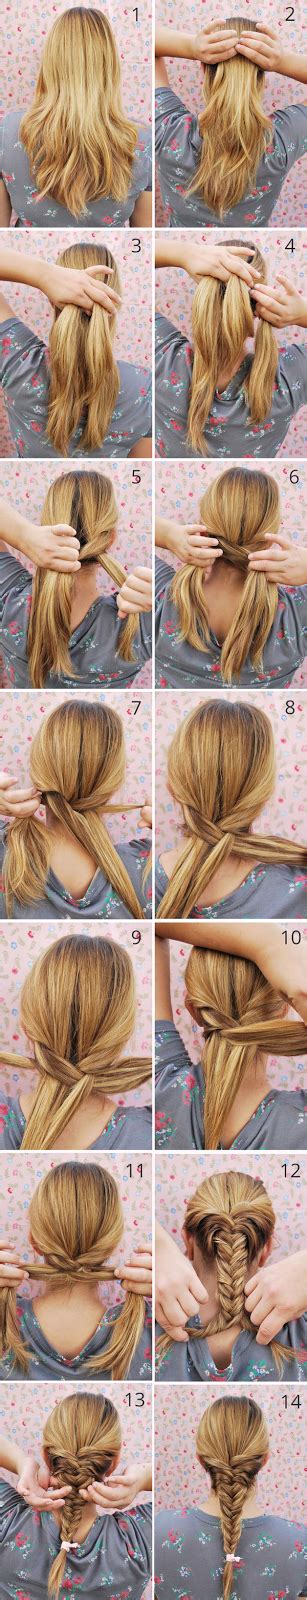 Here's how to fishtail braid! notimenomore: D.I.Y Braid Hairstyles